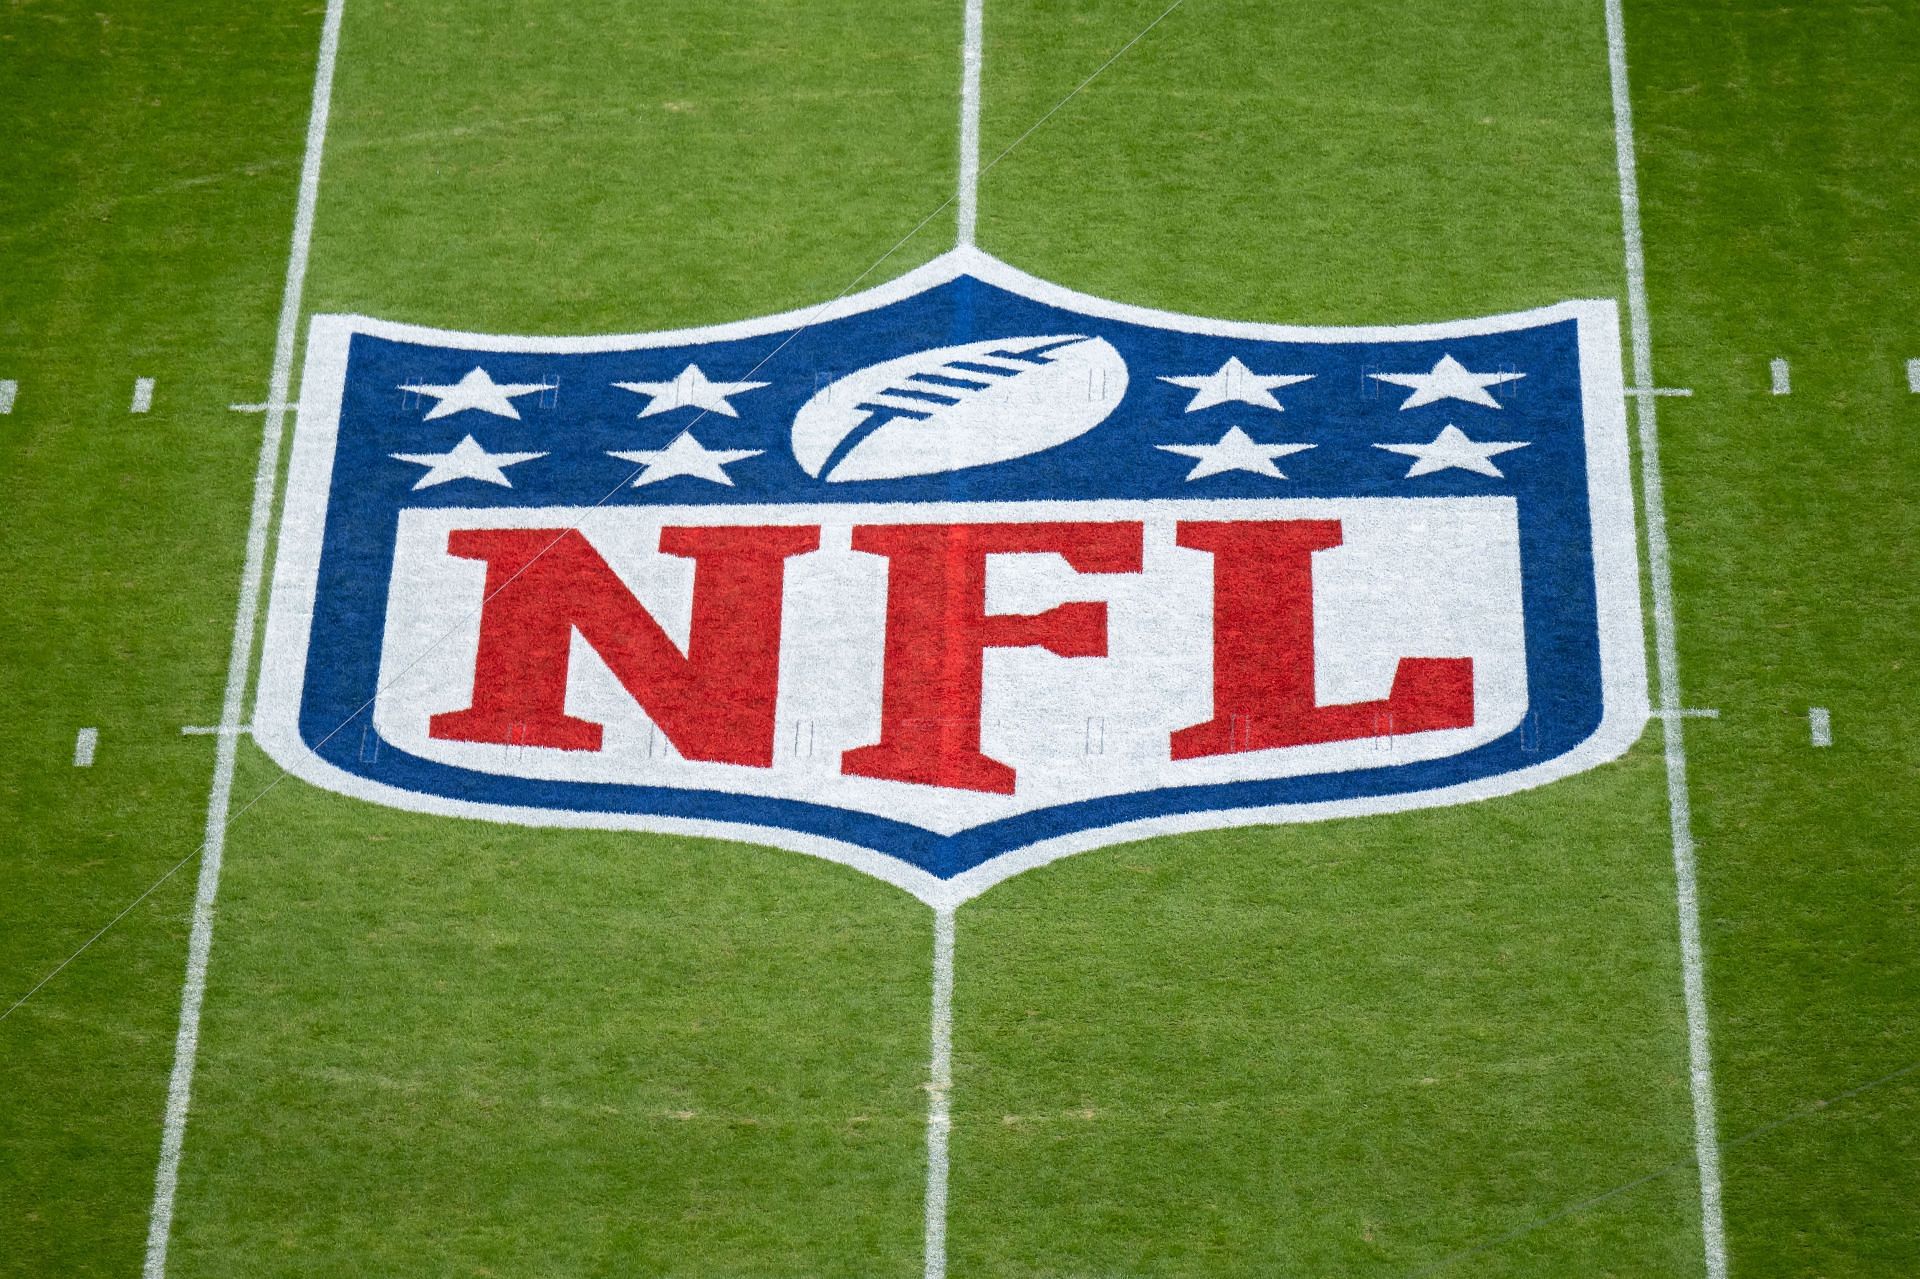 NFL Week 2 coverage map: TV schedule for CBS, Fox regional broadcasts